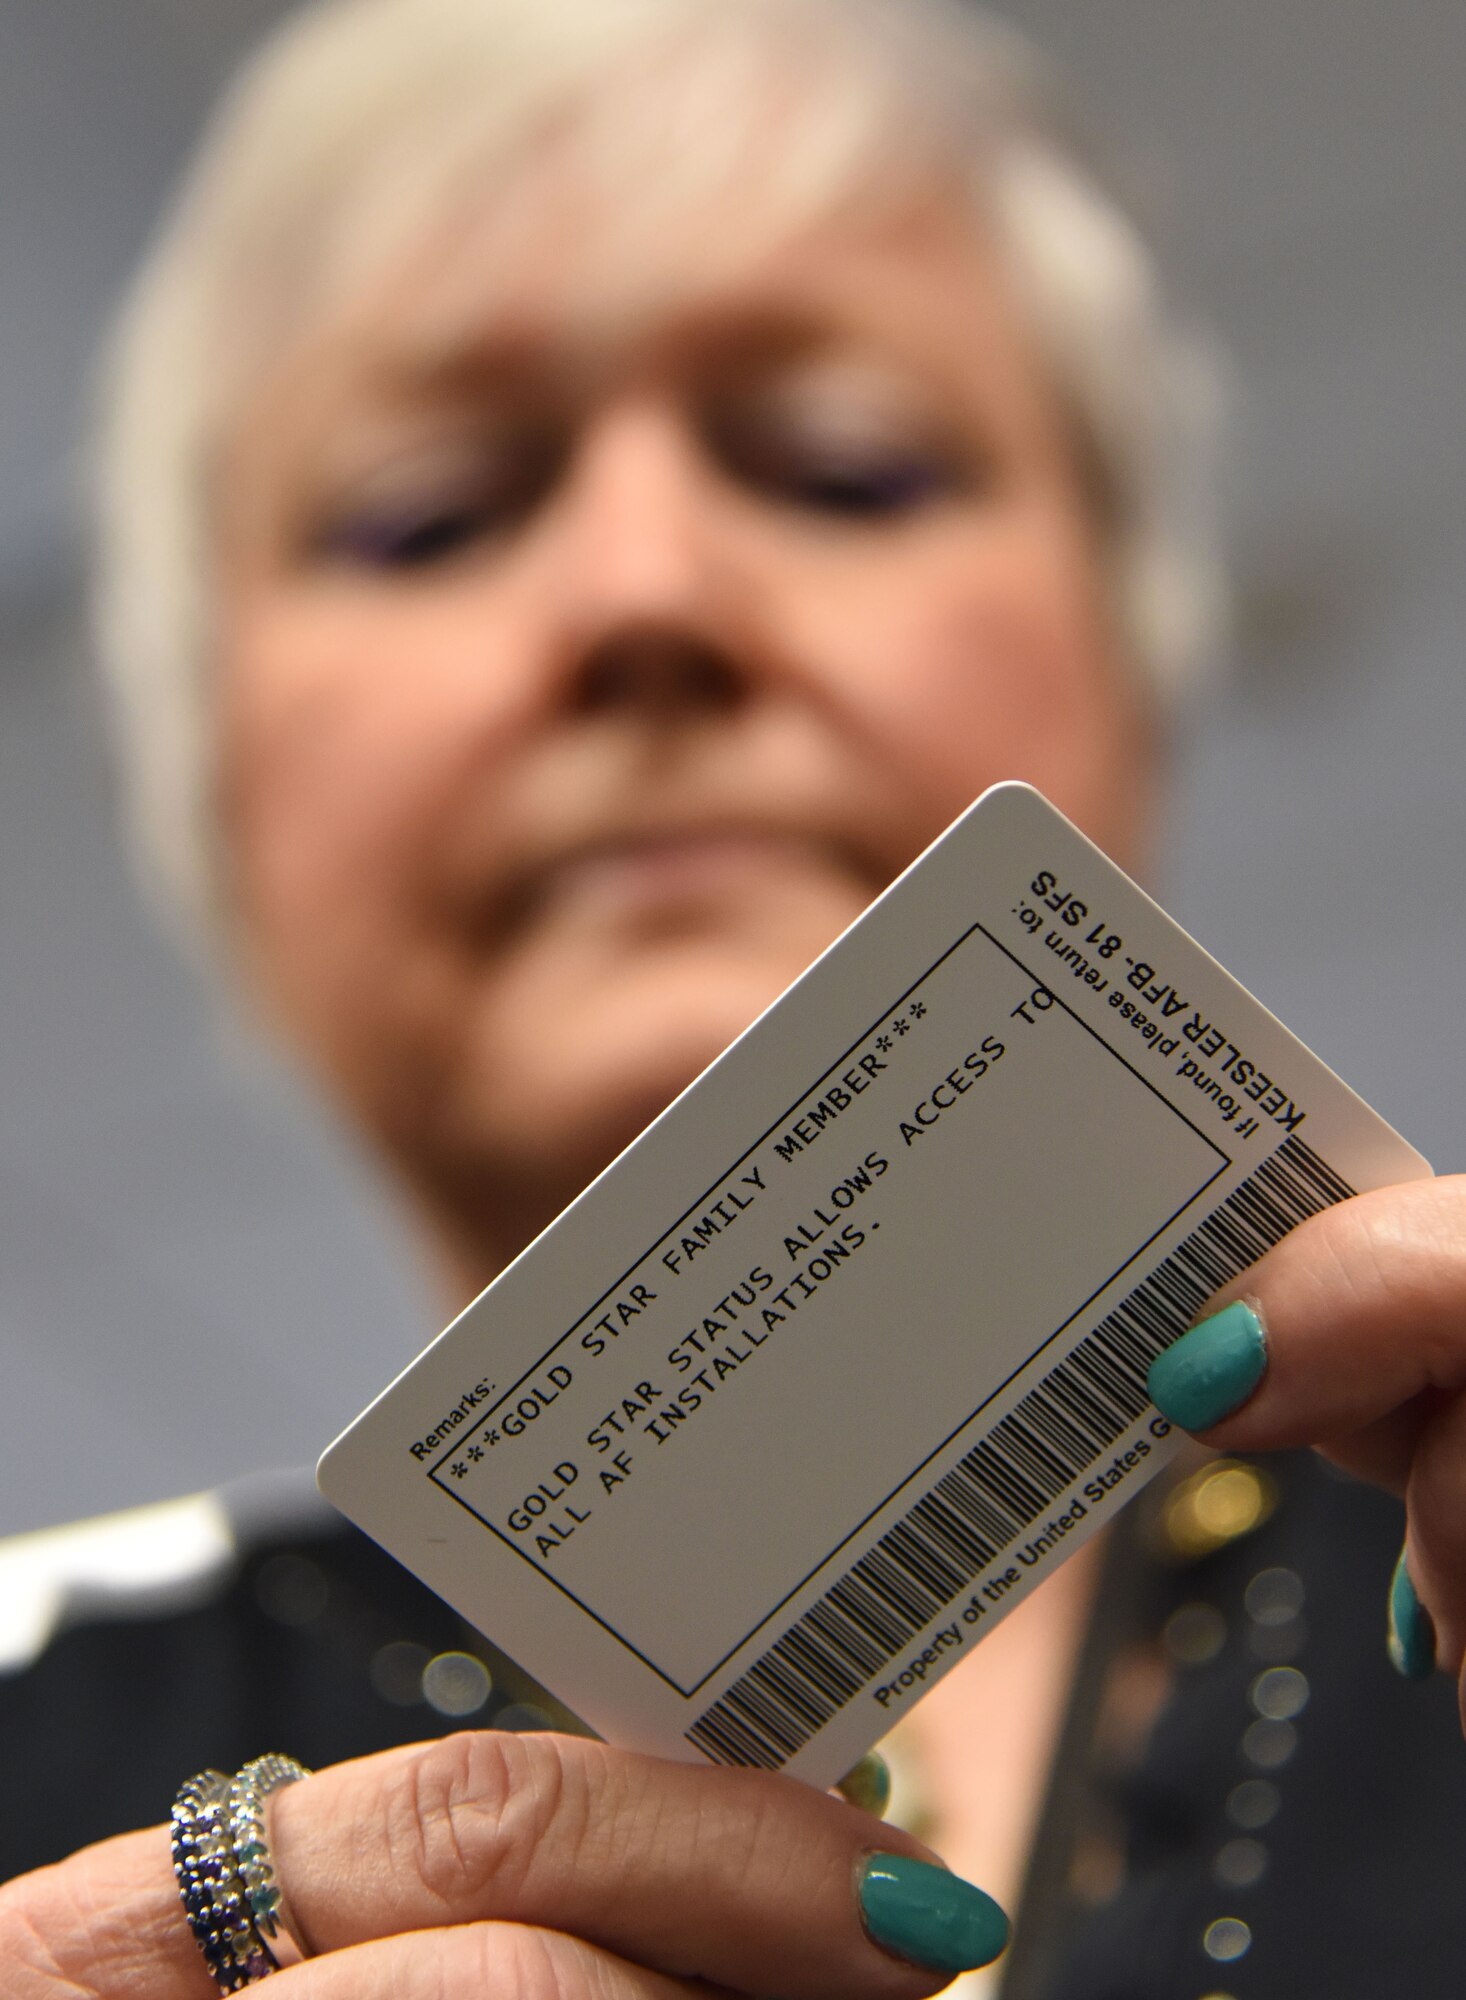 Nora Moore admires her Gold Star Family Member ID card at the visitor center Aug. 29, 2017, on Keesler Air Force Base, Mississippi. As a surviving daughter of a missing in action service member, Moore is allowed to obtain an ID card for recognition and installation access so that she can attend events and access A&FRC referral services. She is Keesler’s first Gold Star Family Member. (U.S. Air Force photo by Kemberly Groue)